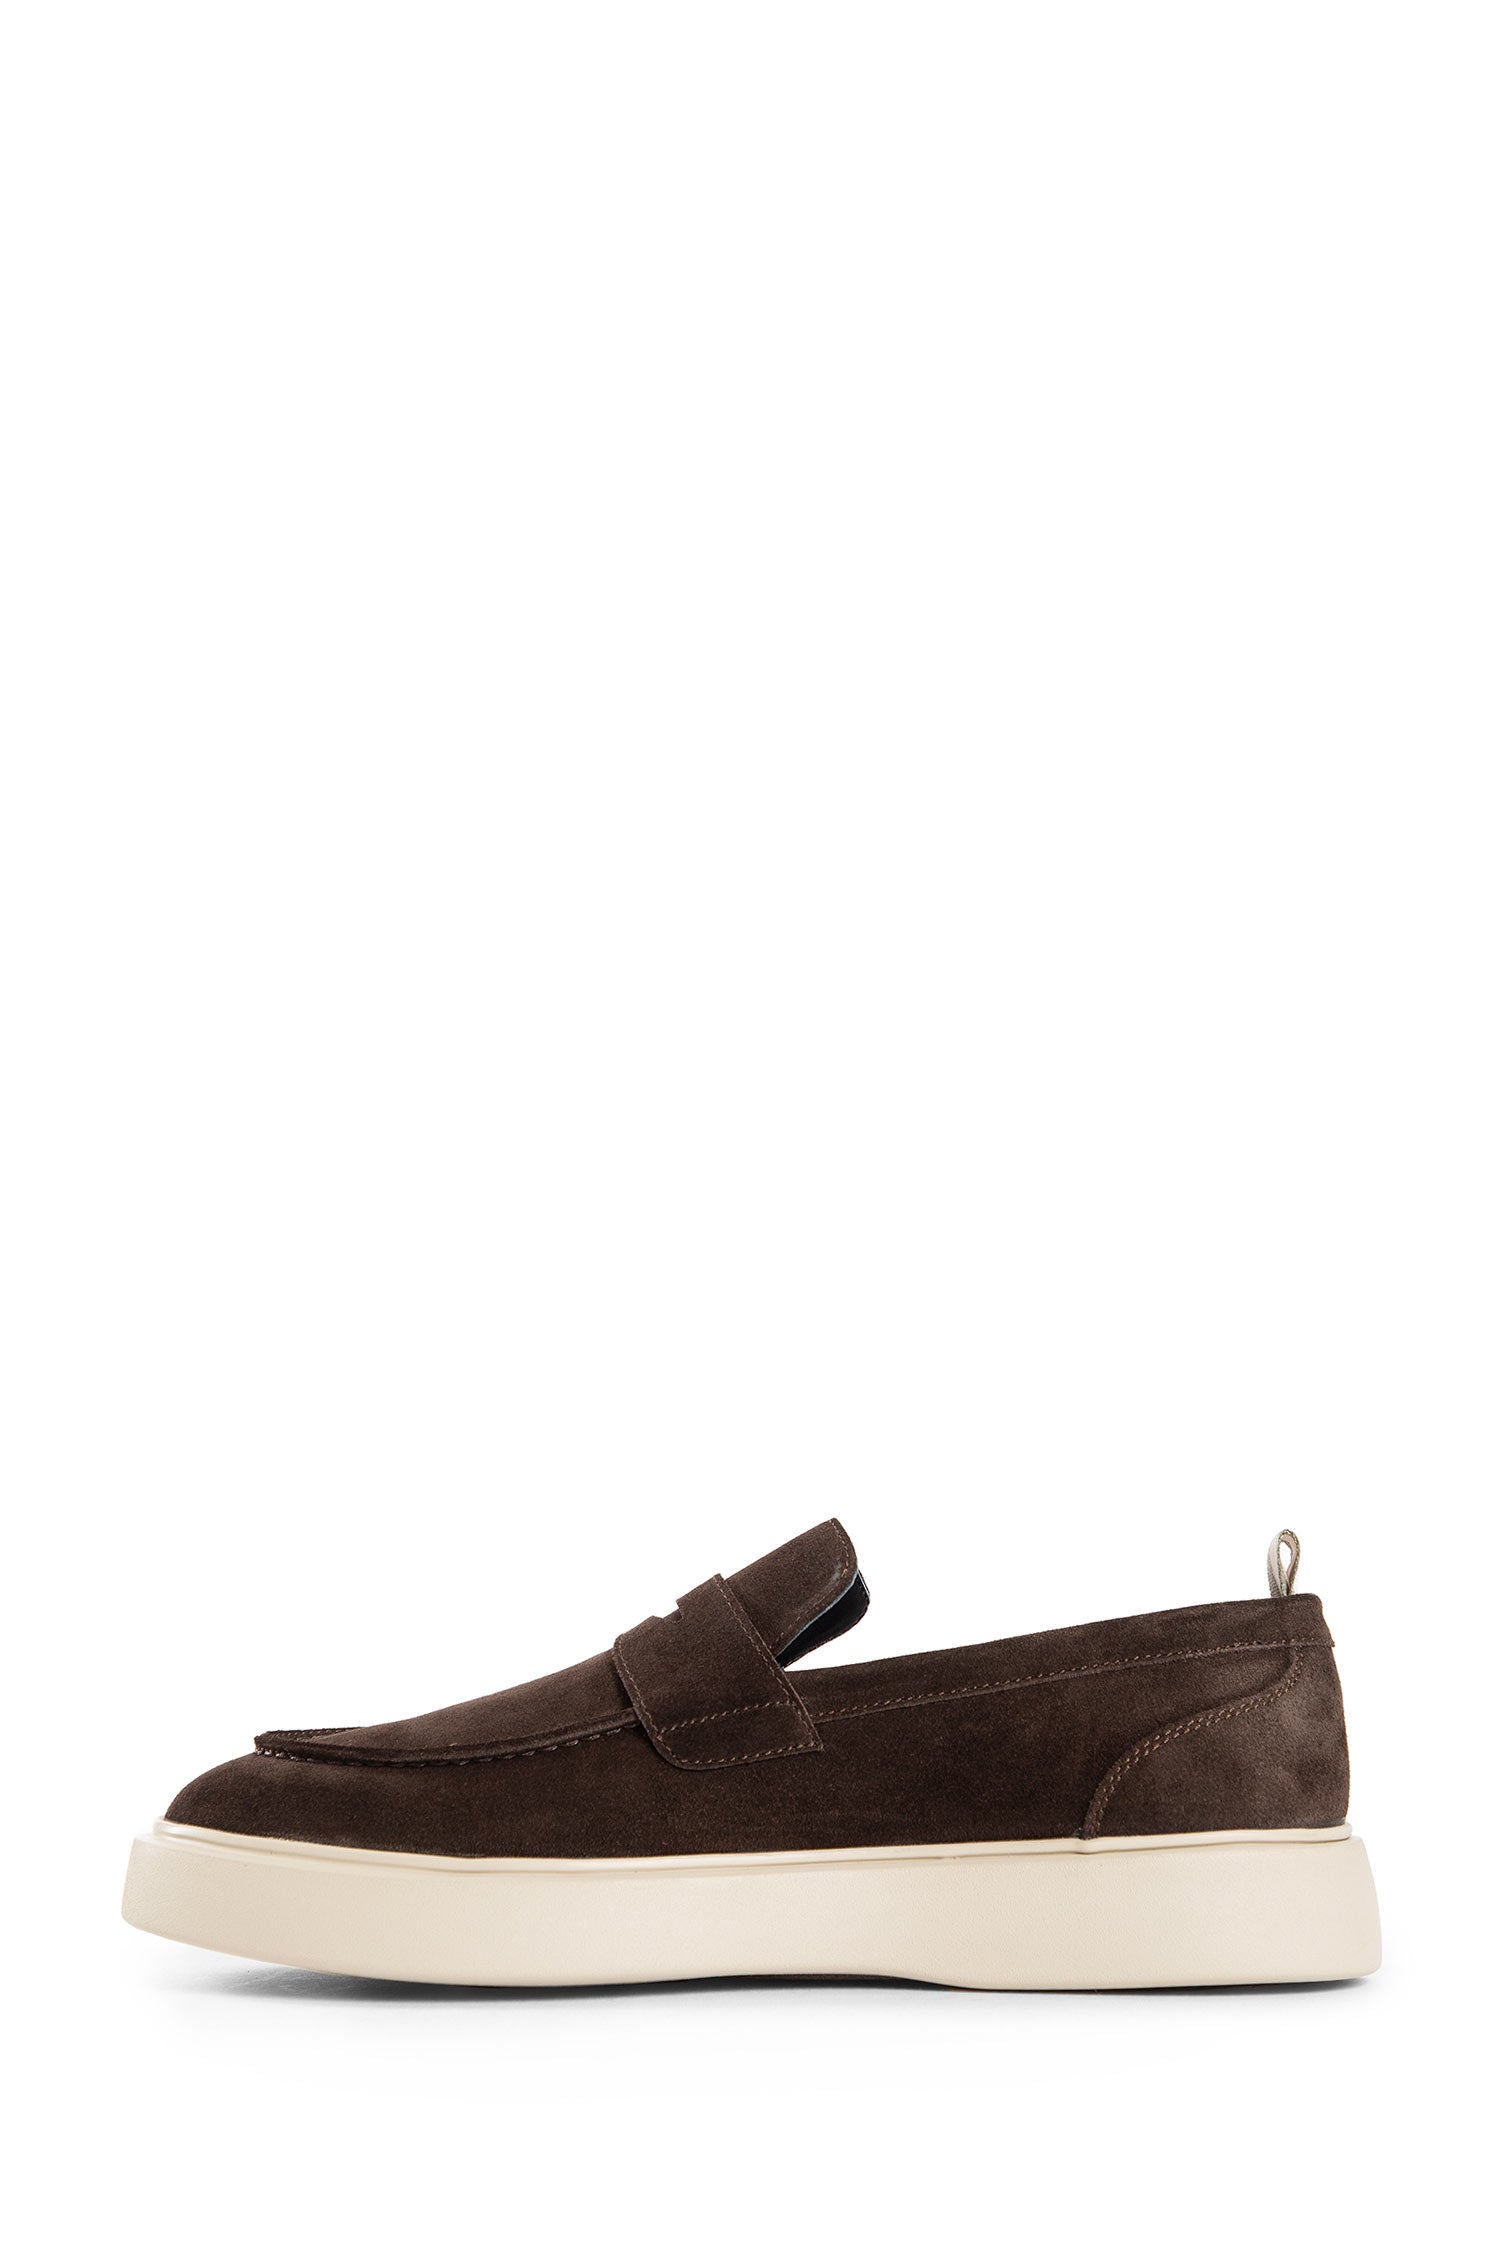 OFFICINE CREATIVE MAN BROWN LOAFERS & FLATS